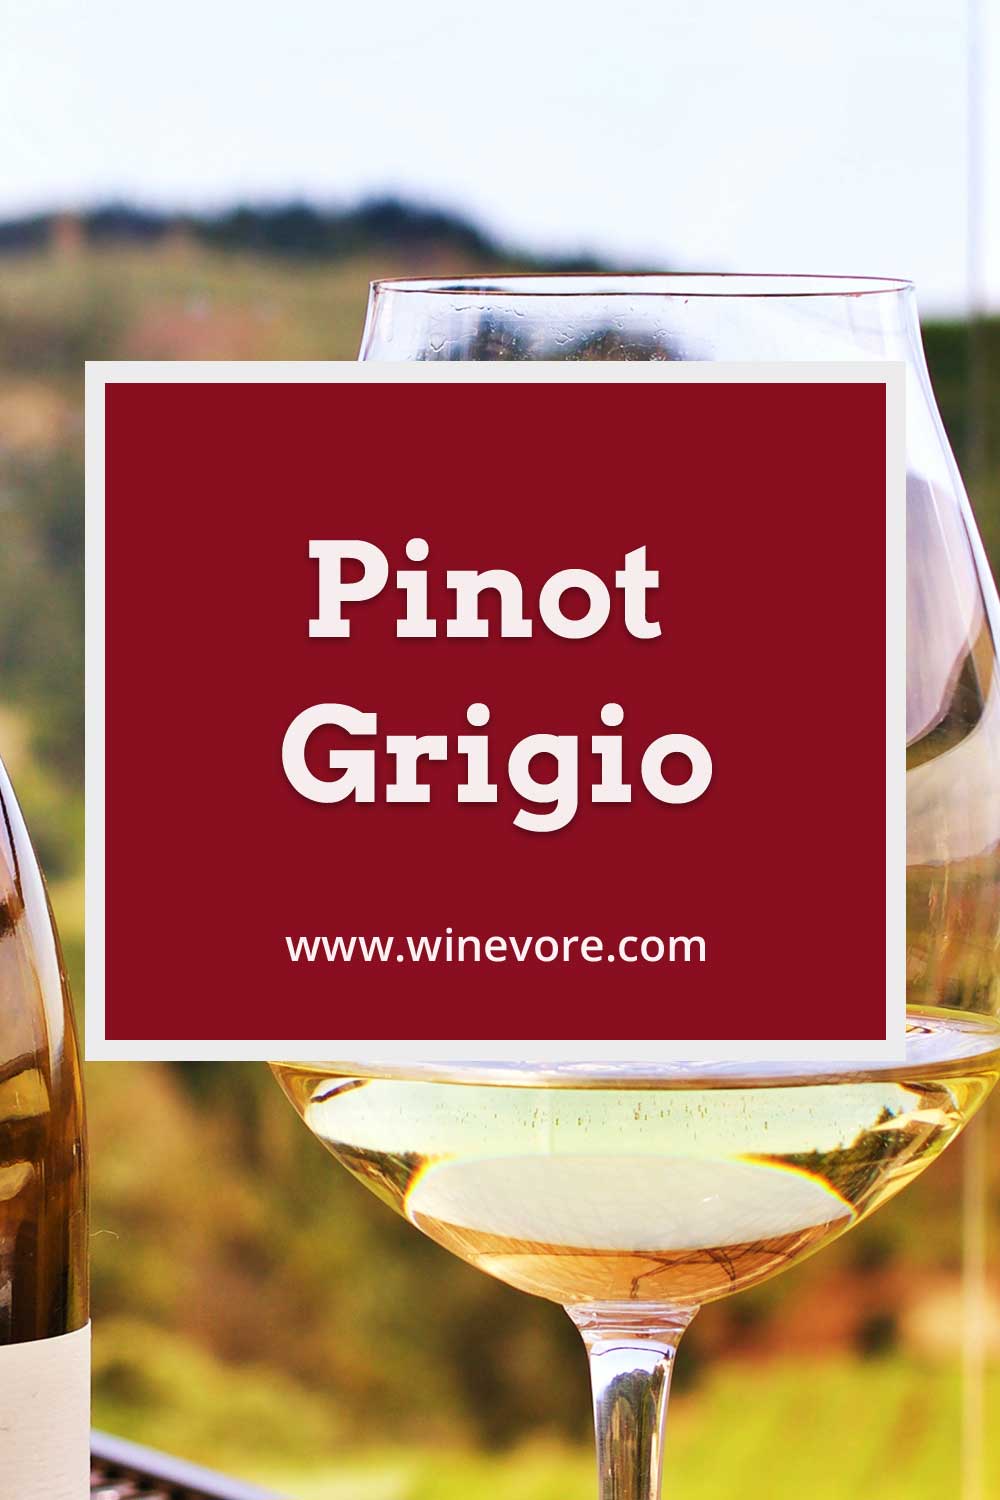 A glass slightly filled with white wine beside a wine bottle - Pinot Grigio.